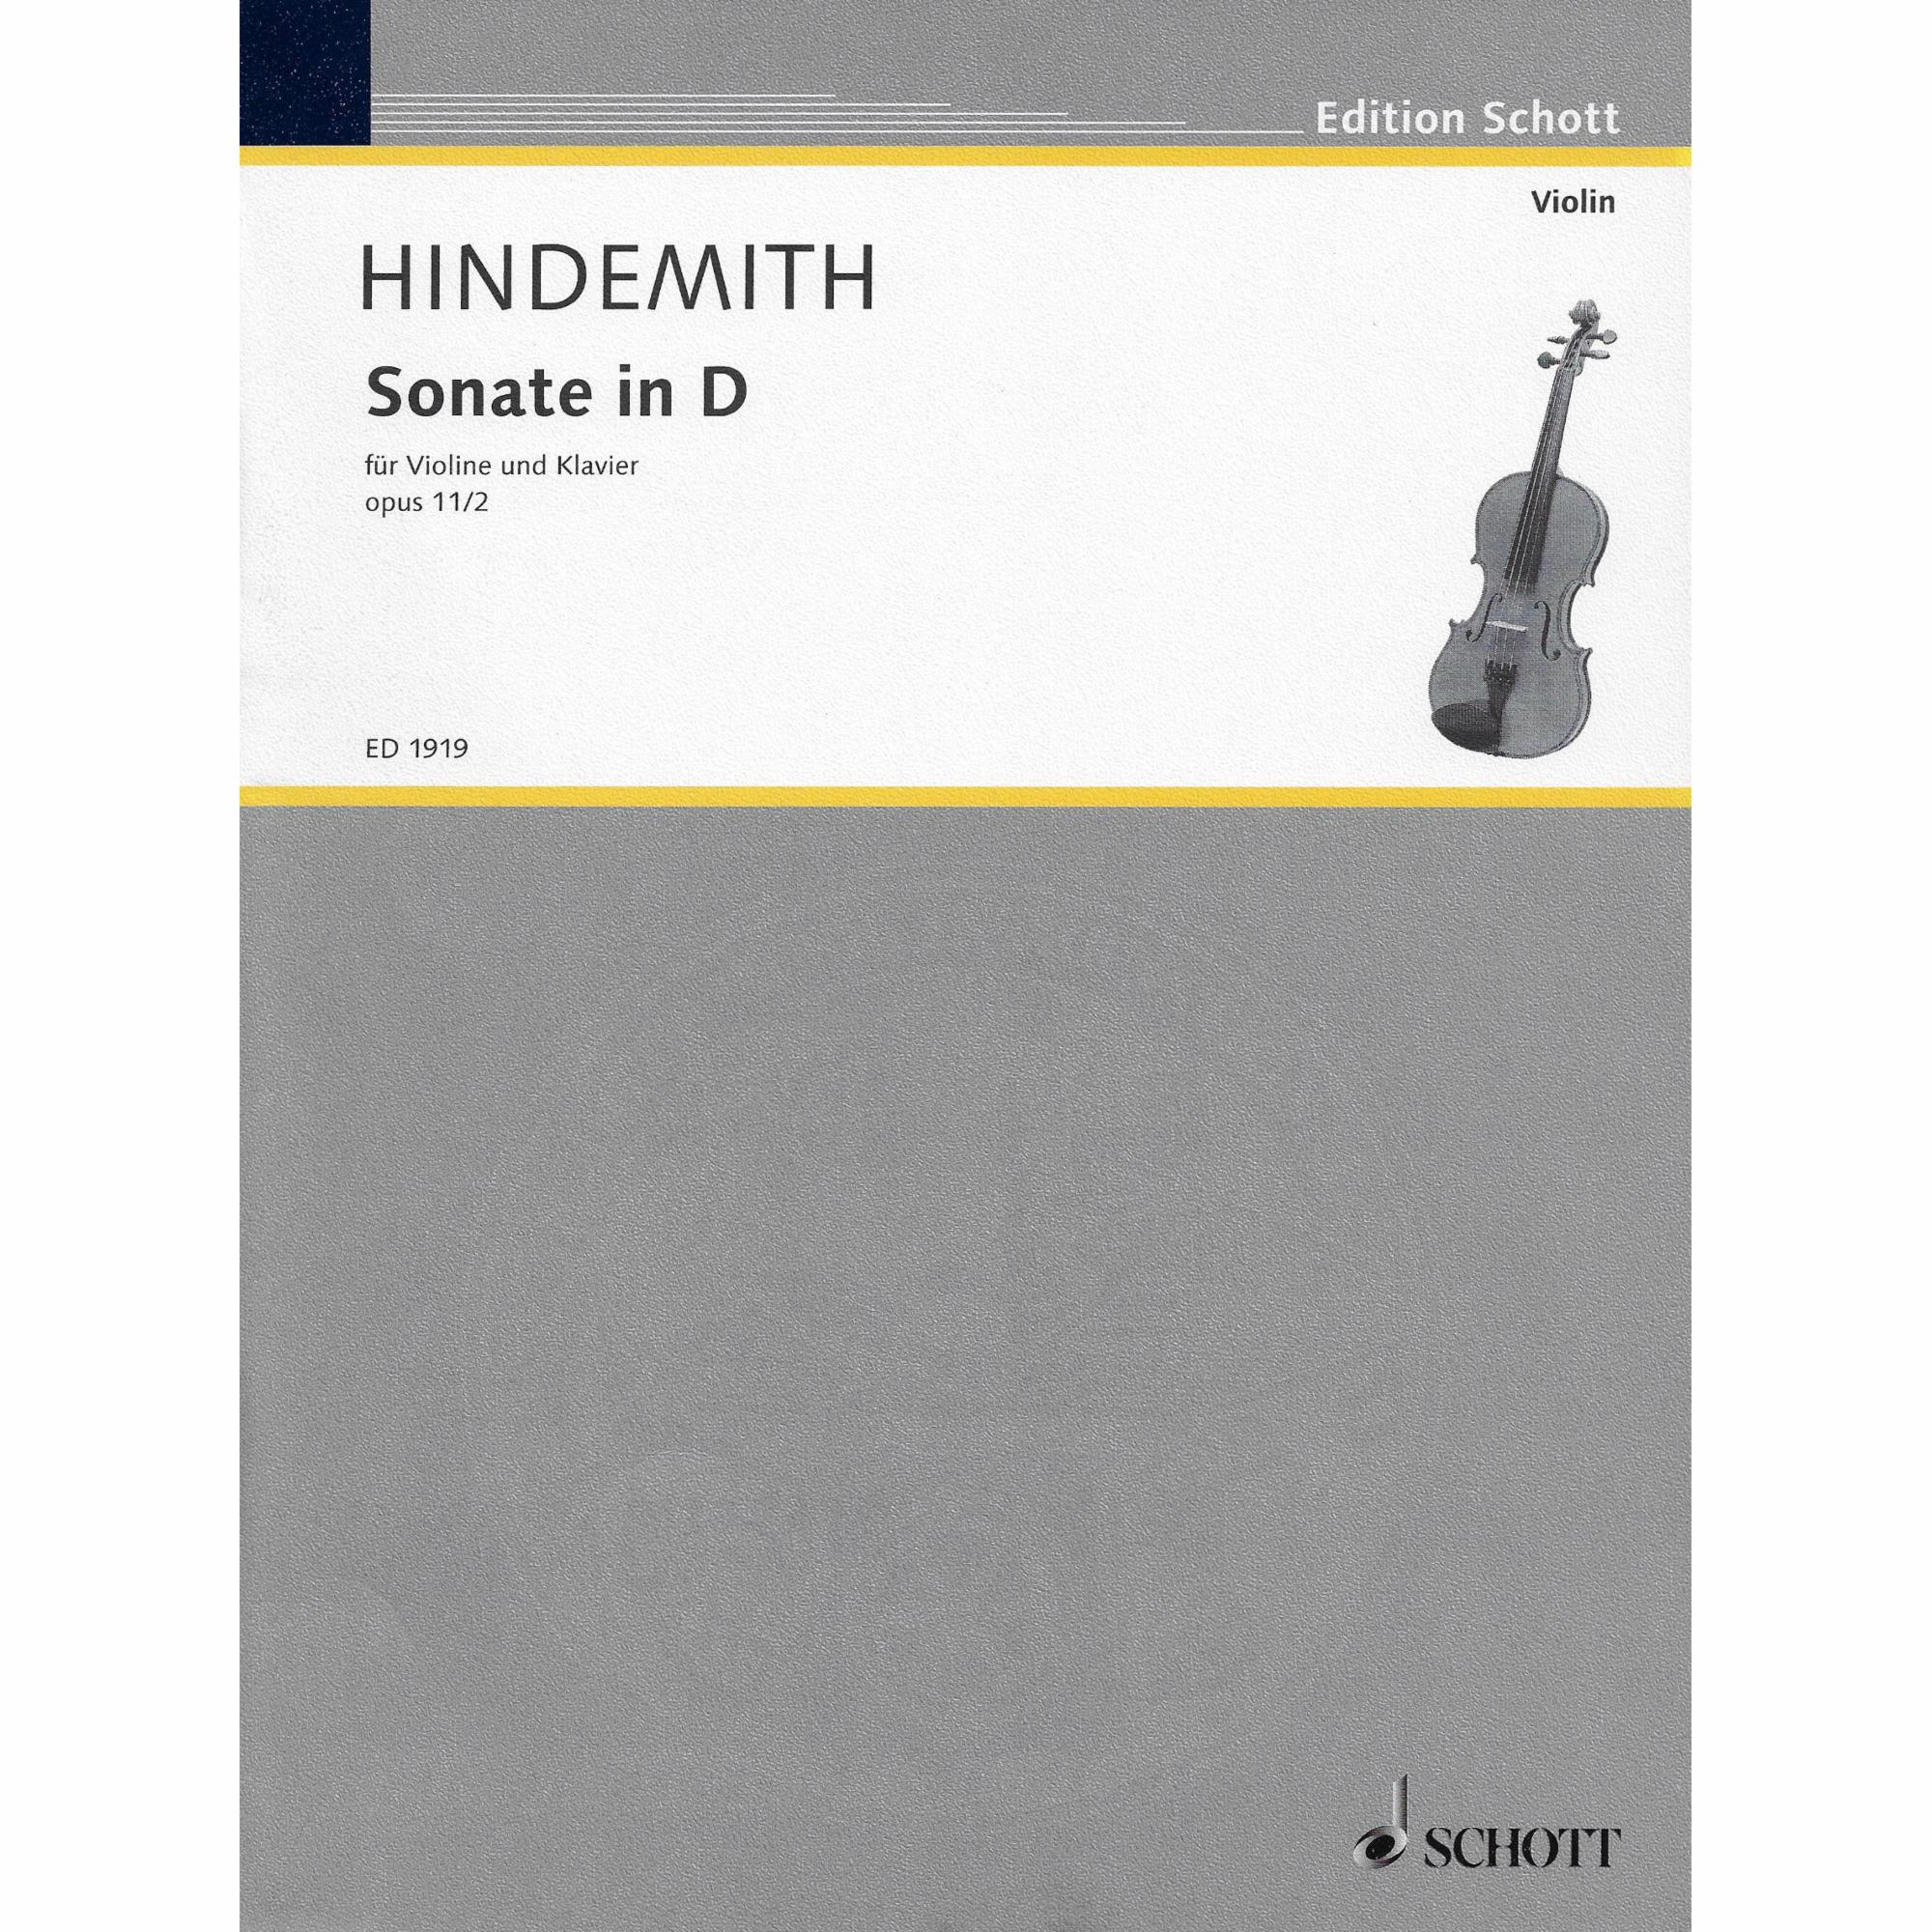 Hindemith -- Sonata in D, Op. 11/2 for Violin and Piano